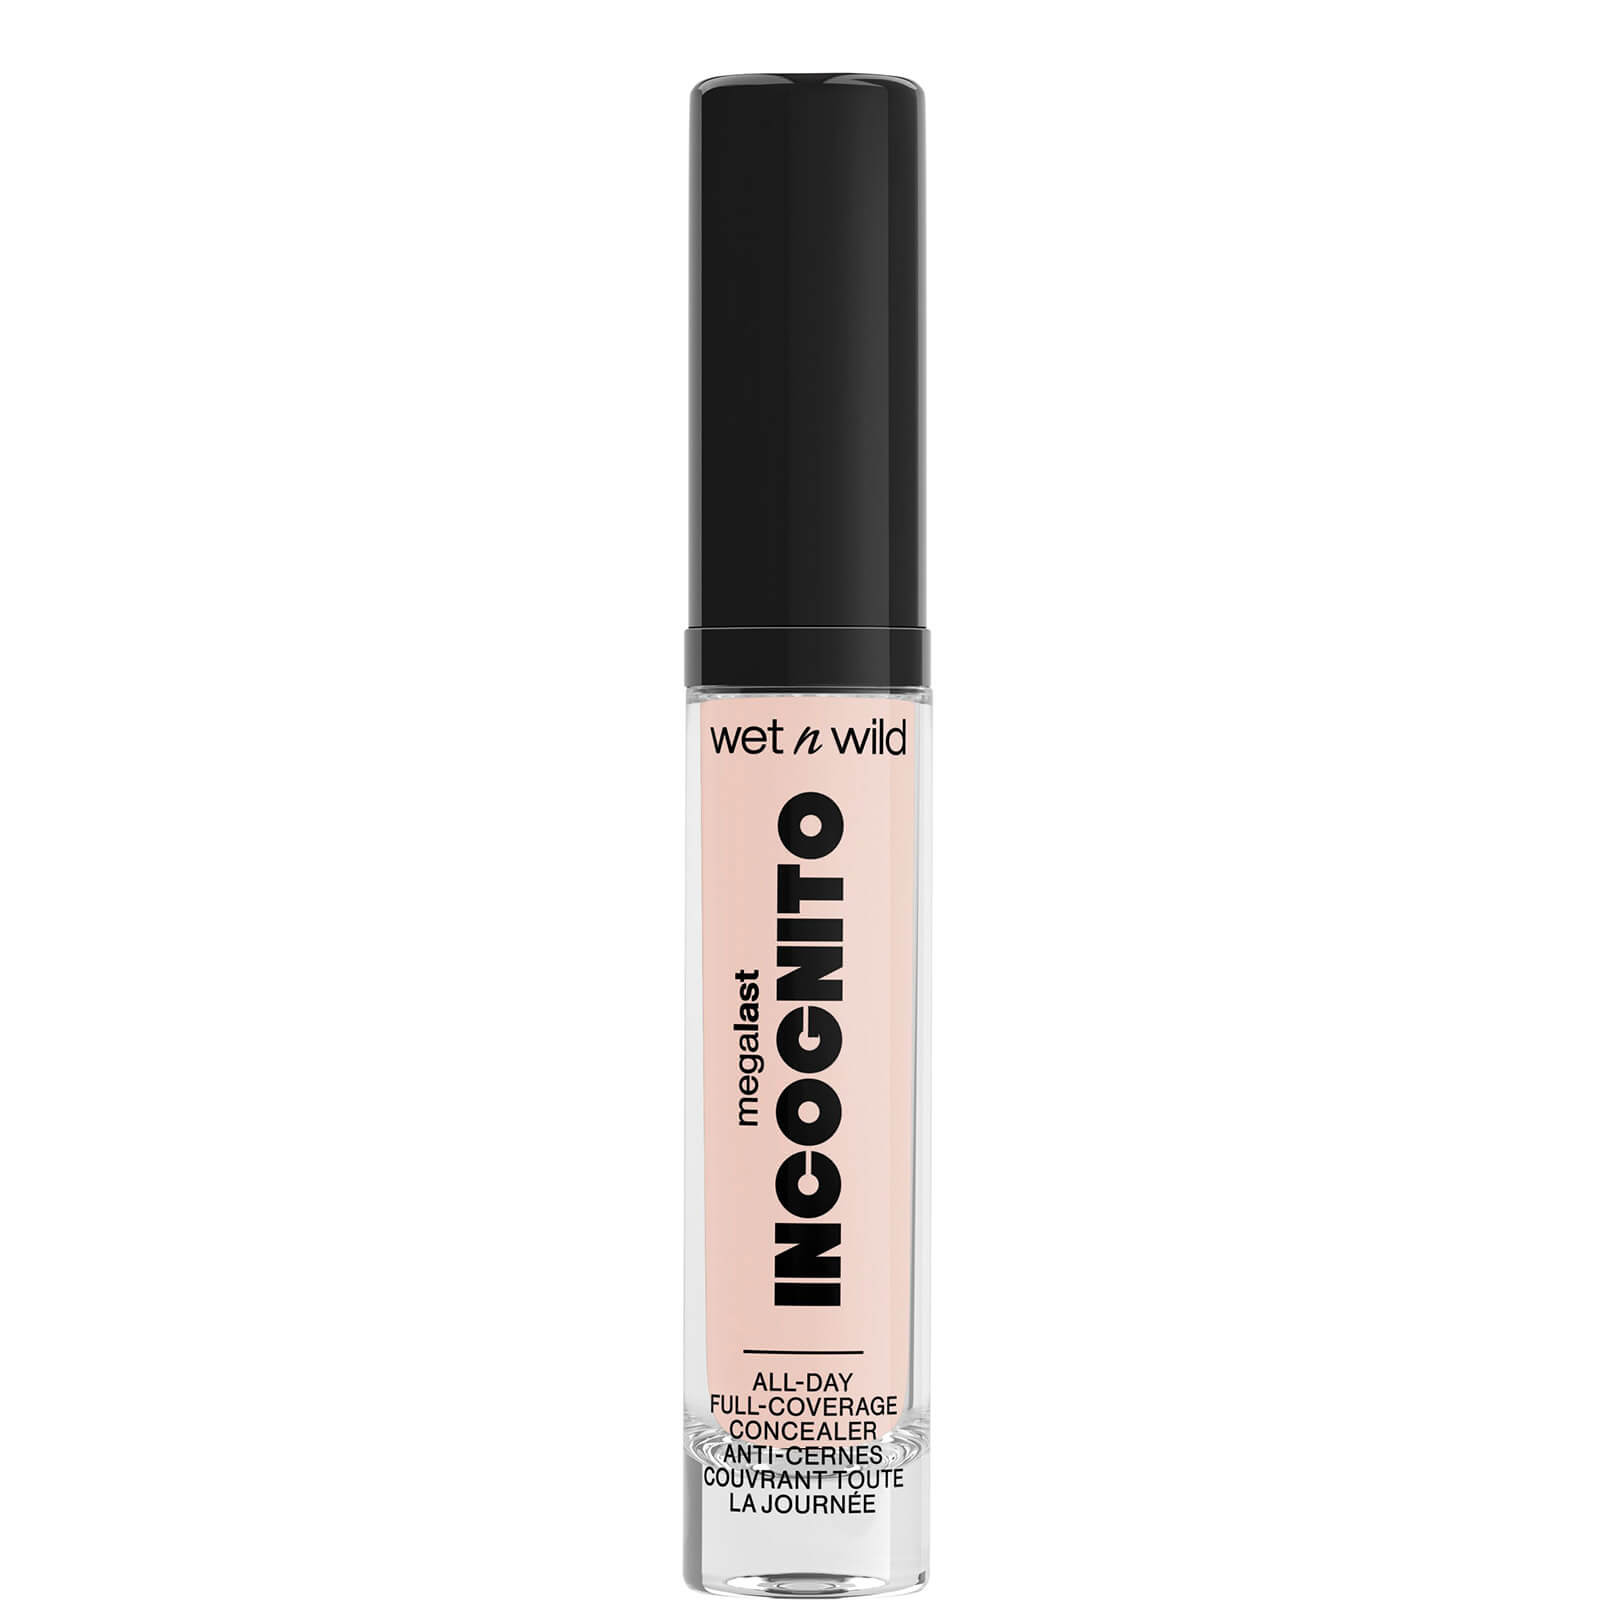 wet n wild Megalast Incognito Full-Coverage Concealer 5.5ml (Various Shades) - Light Beige